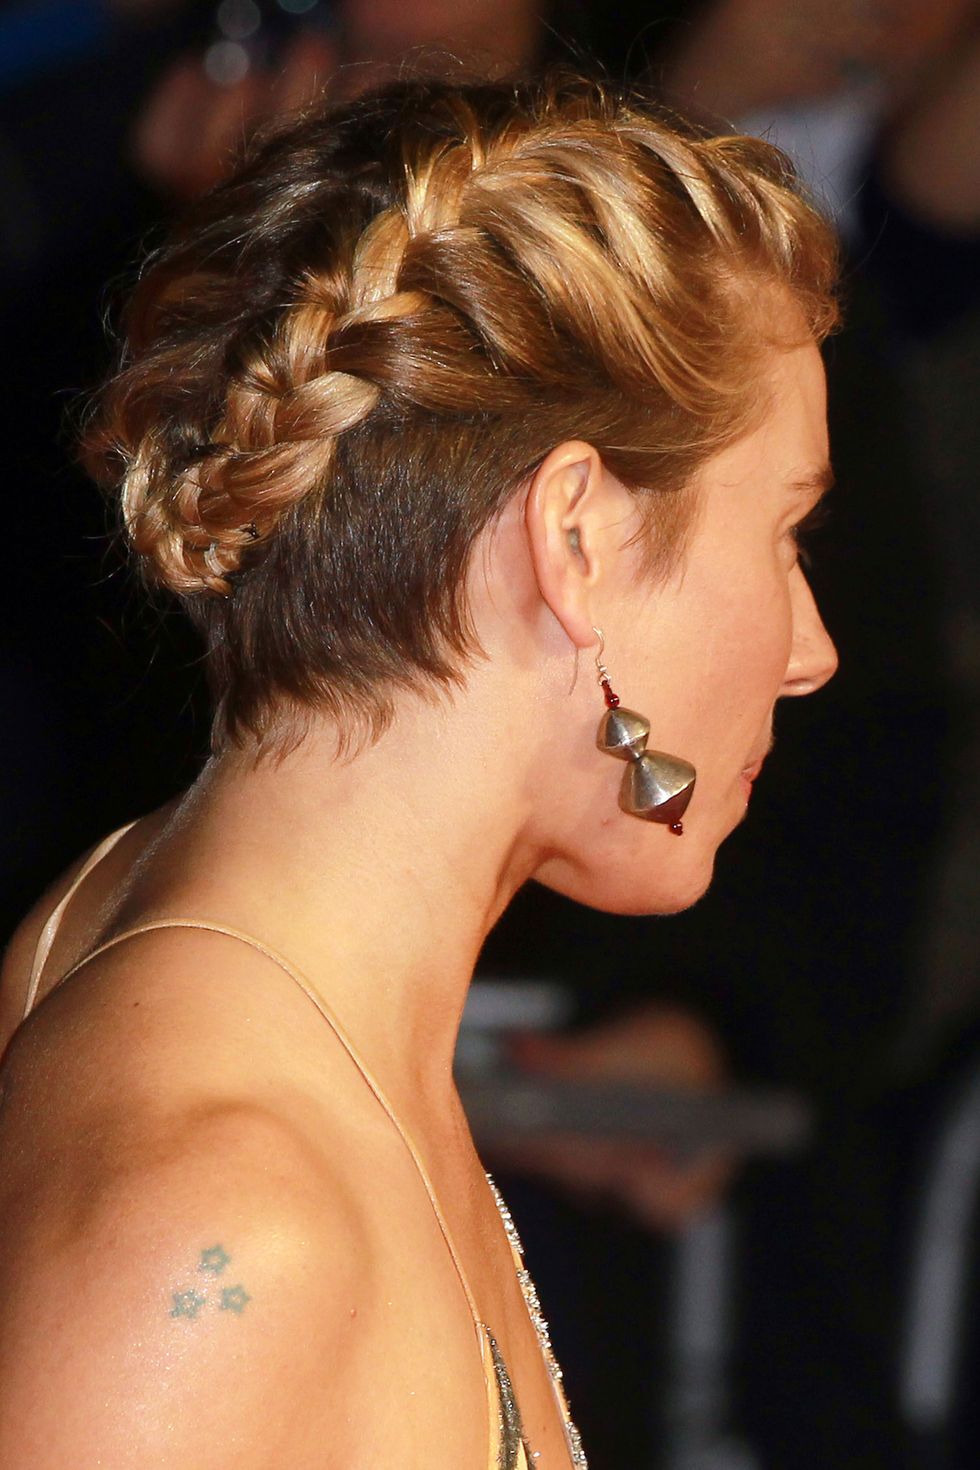 Every single hairstyle Sienna Miller has ever had